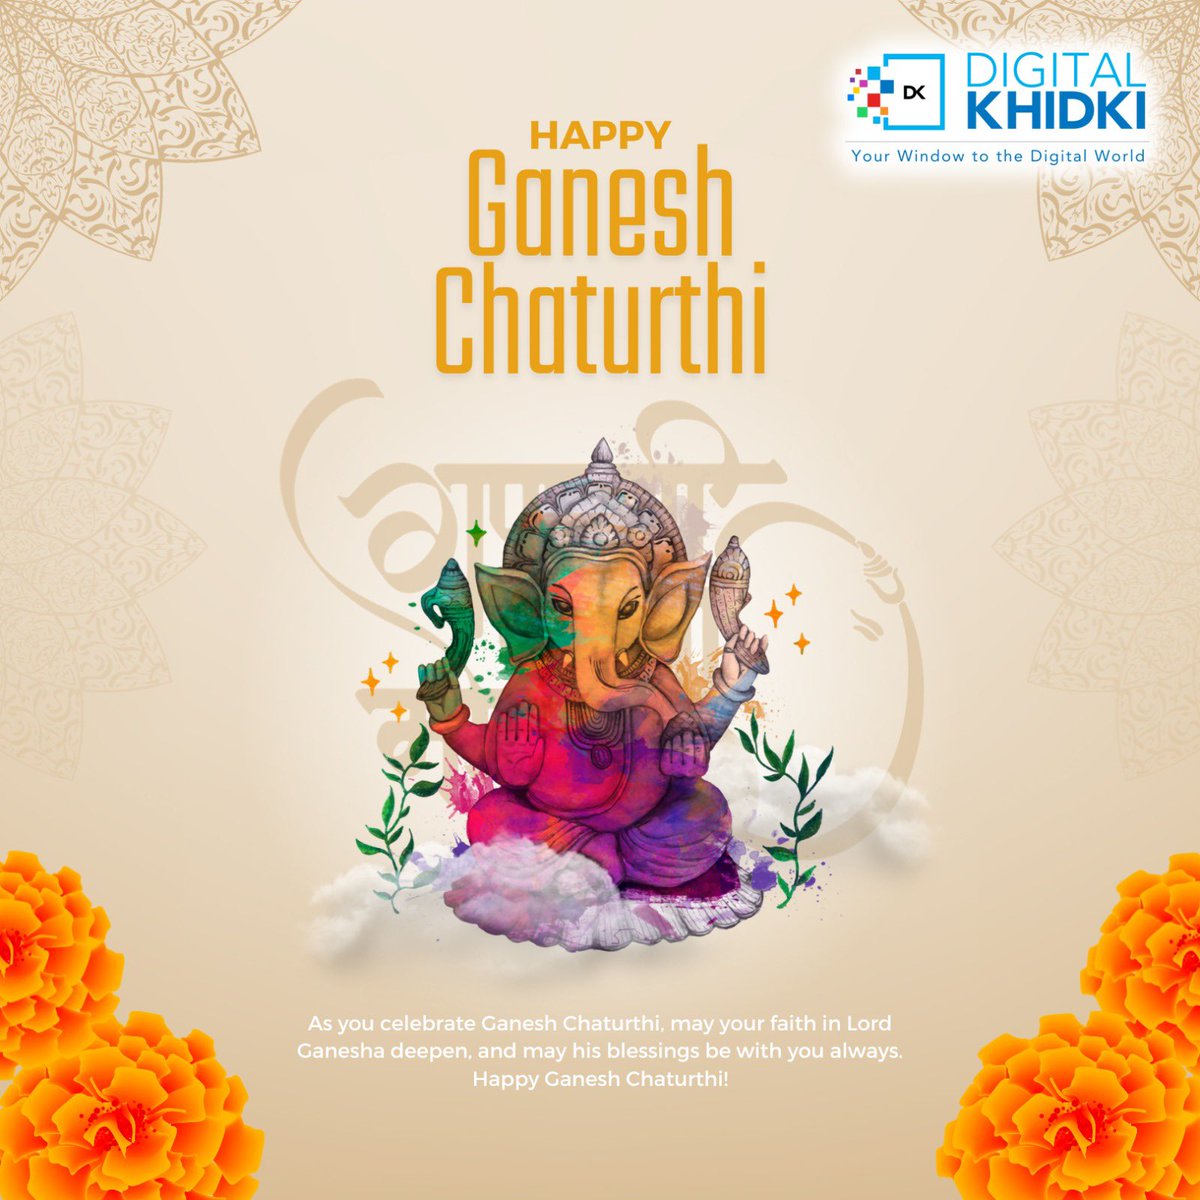 When we have Ganapati Bappa in our hearts, there is nothing to worry about in life. Happy Ganesh Chaturthi to you and your loved ones. #ganeshachaturthi